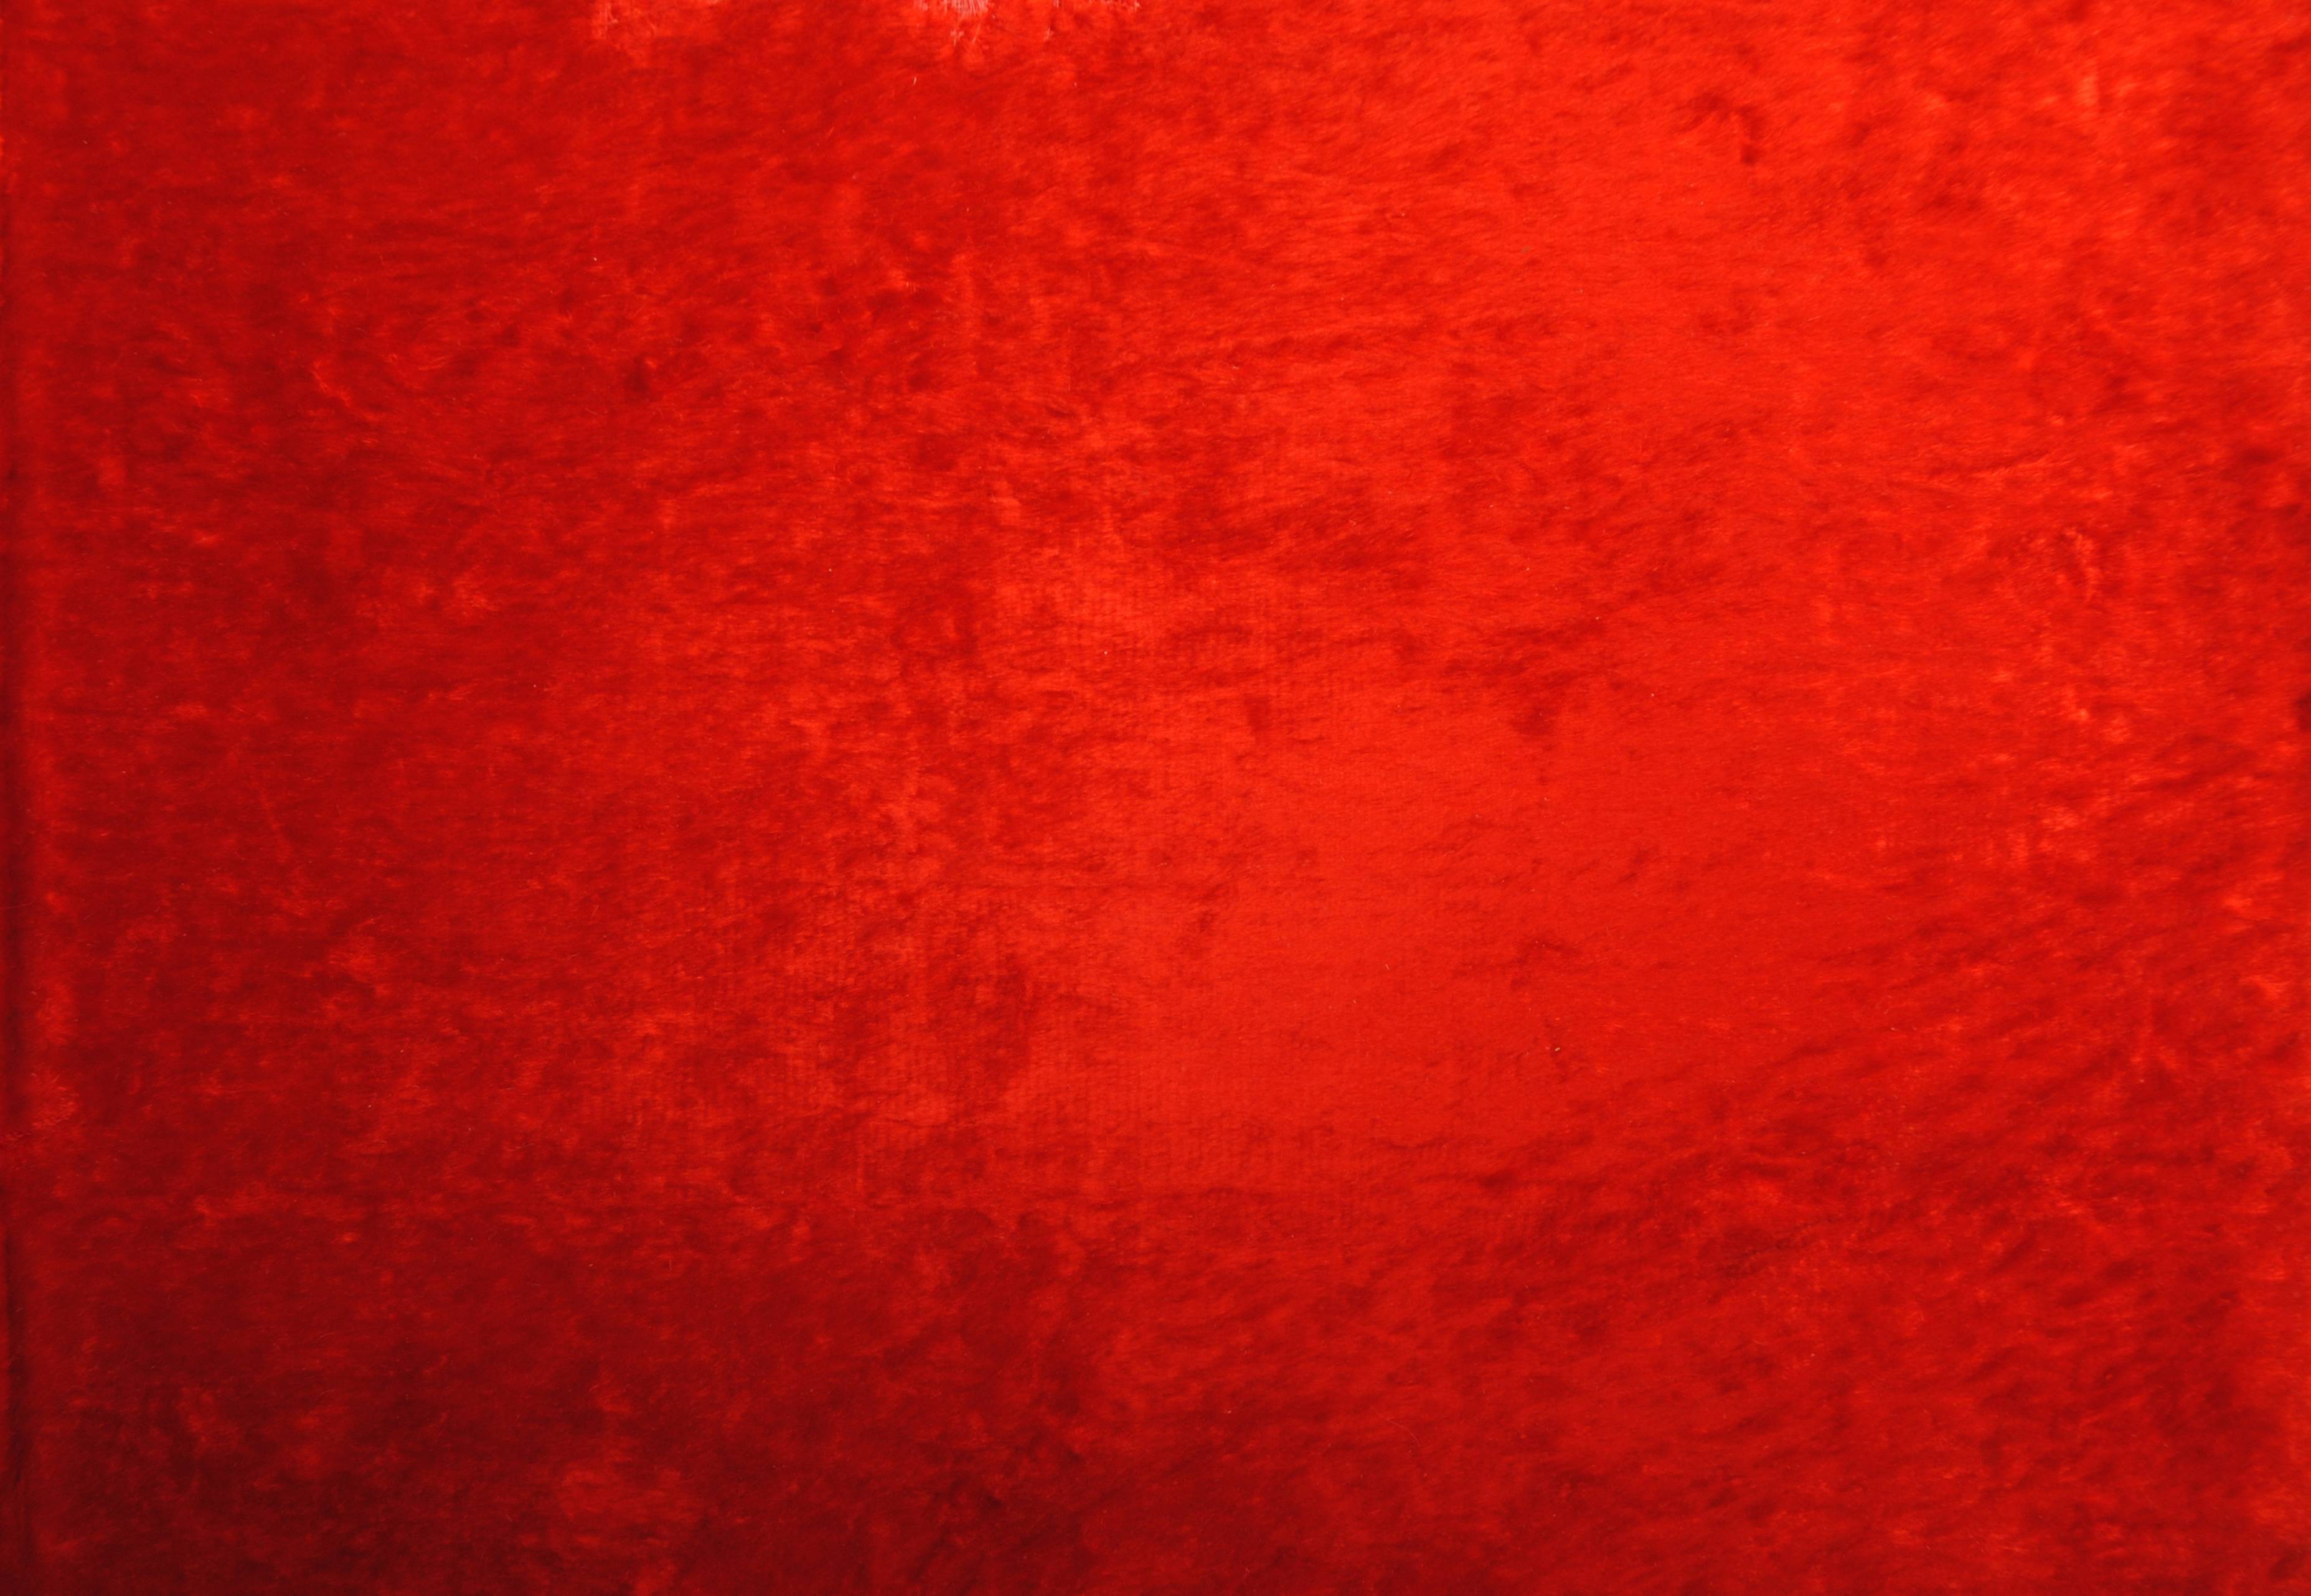 Wallpaper For > Light Red Texture Background